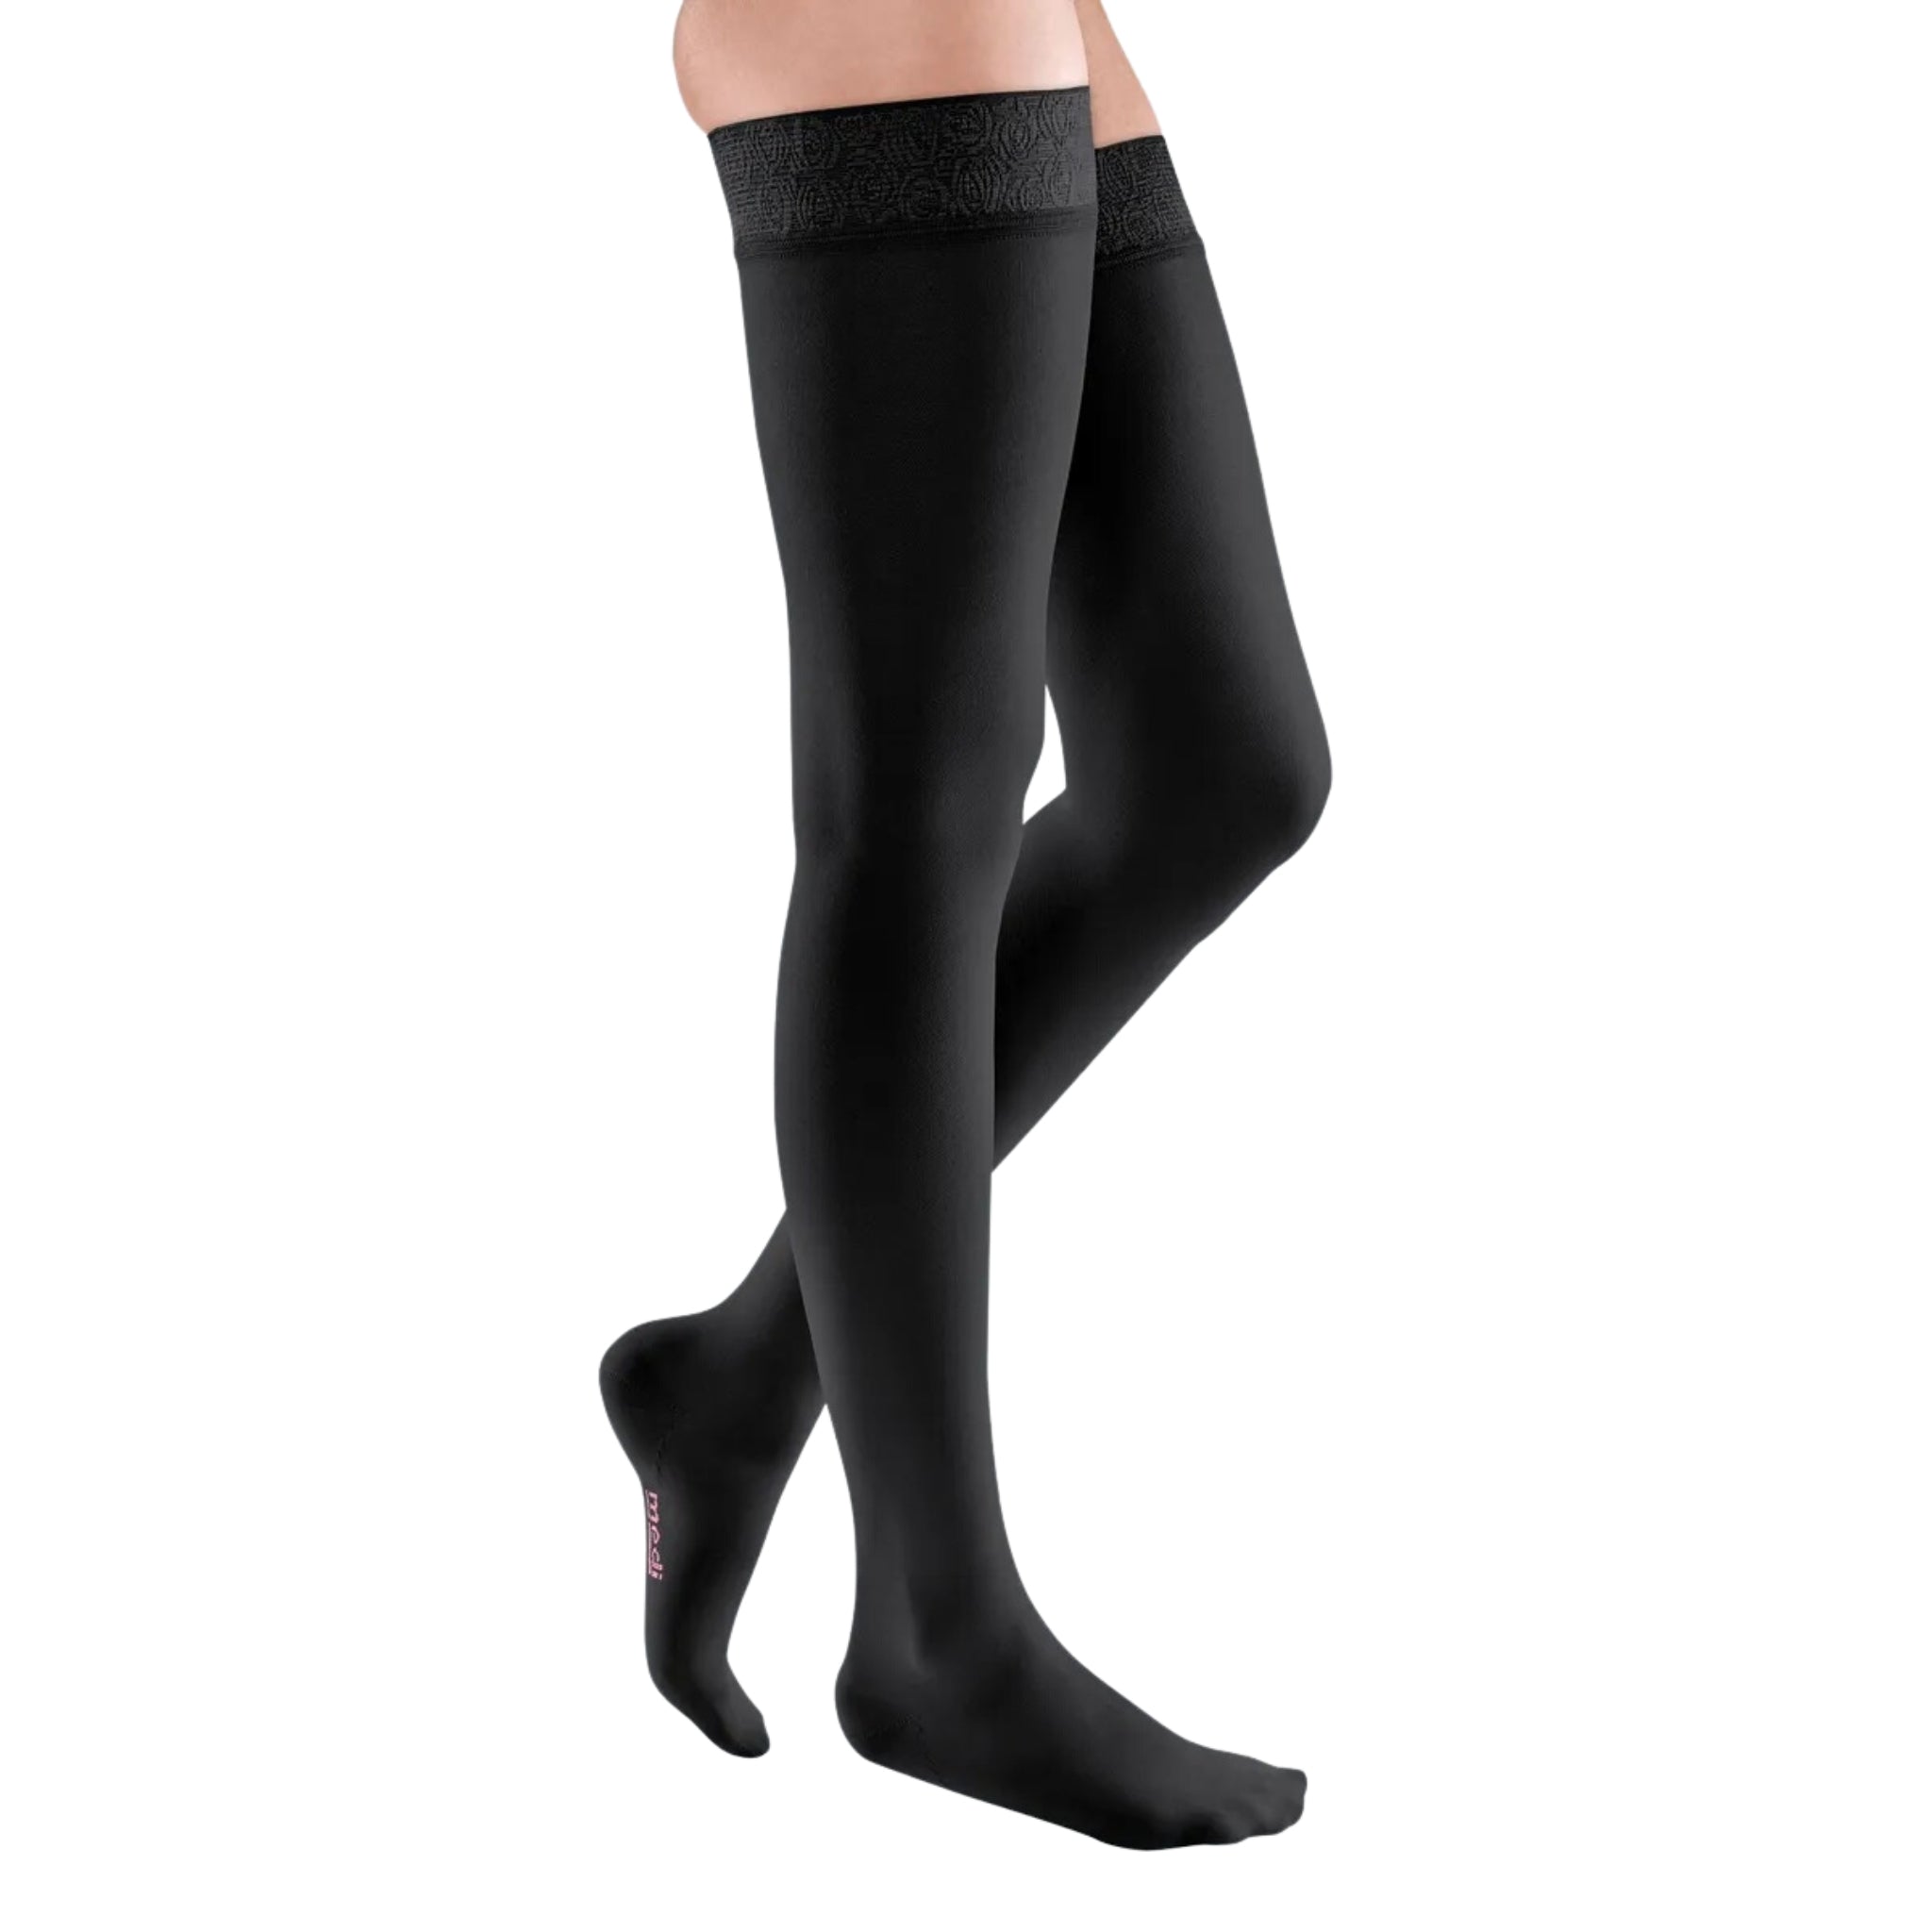 mediven elegance Thigh High Compression Stockings + Silicone Topband Black